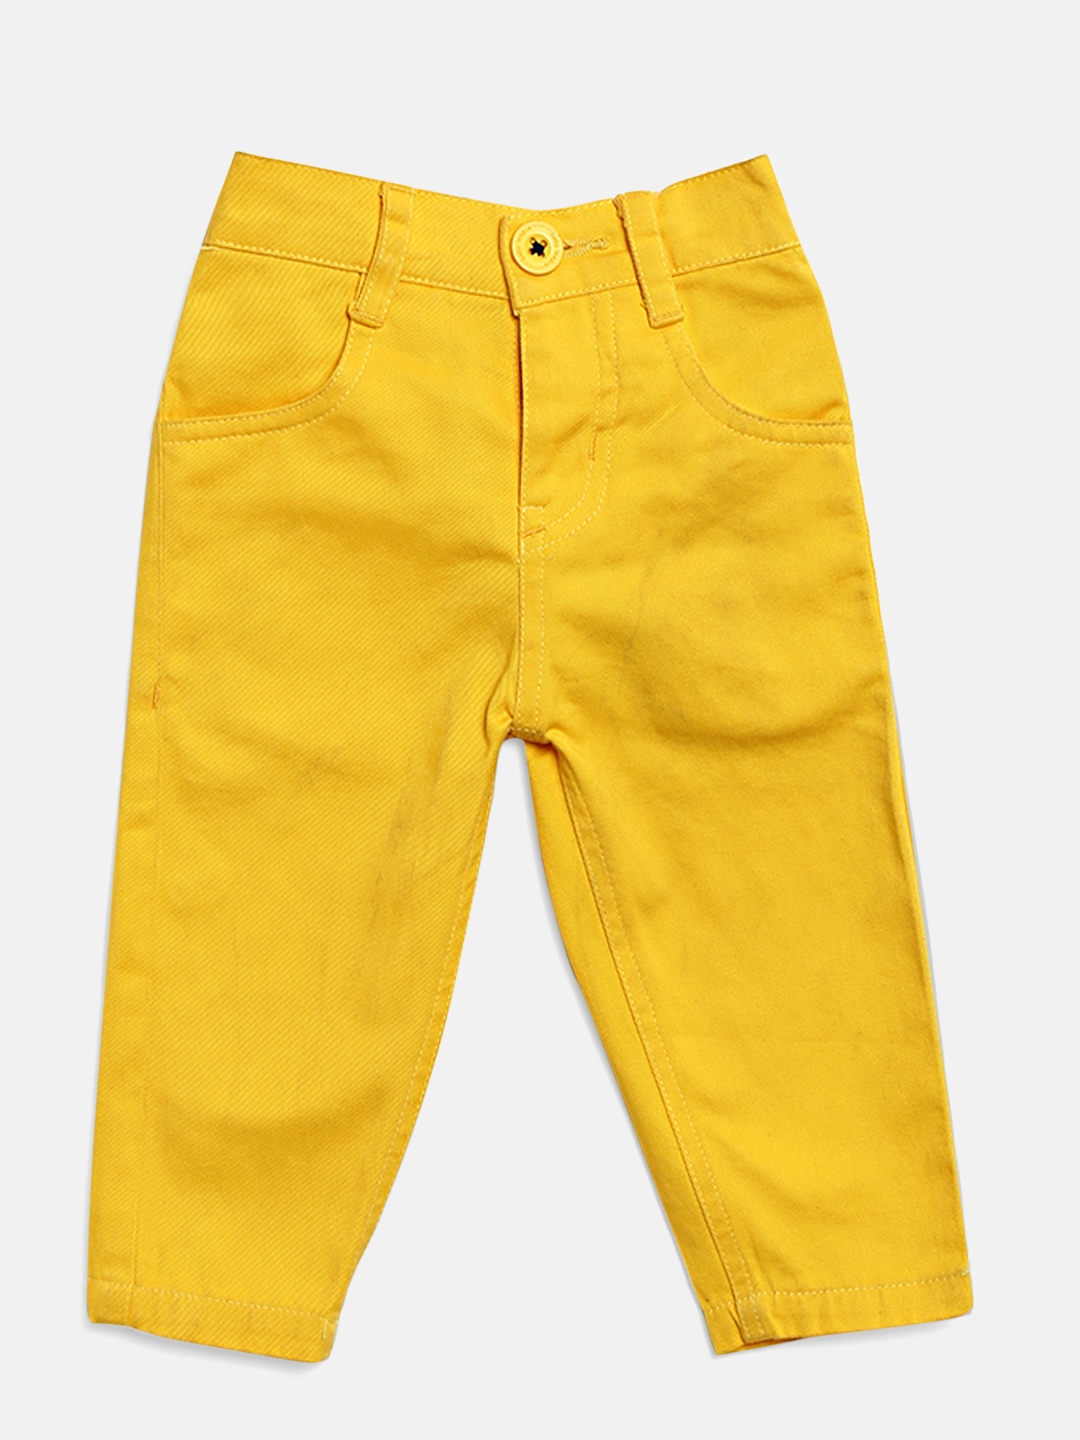 Buy KIDSVILLE Yellow Printed Cotton Boys Pants  Shoppers Stop